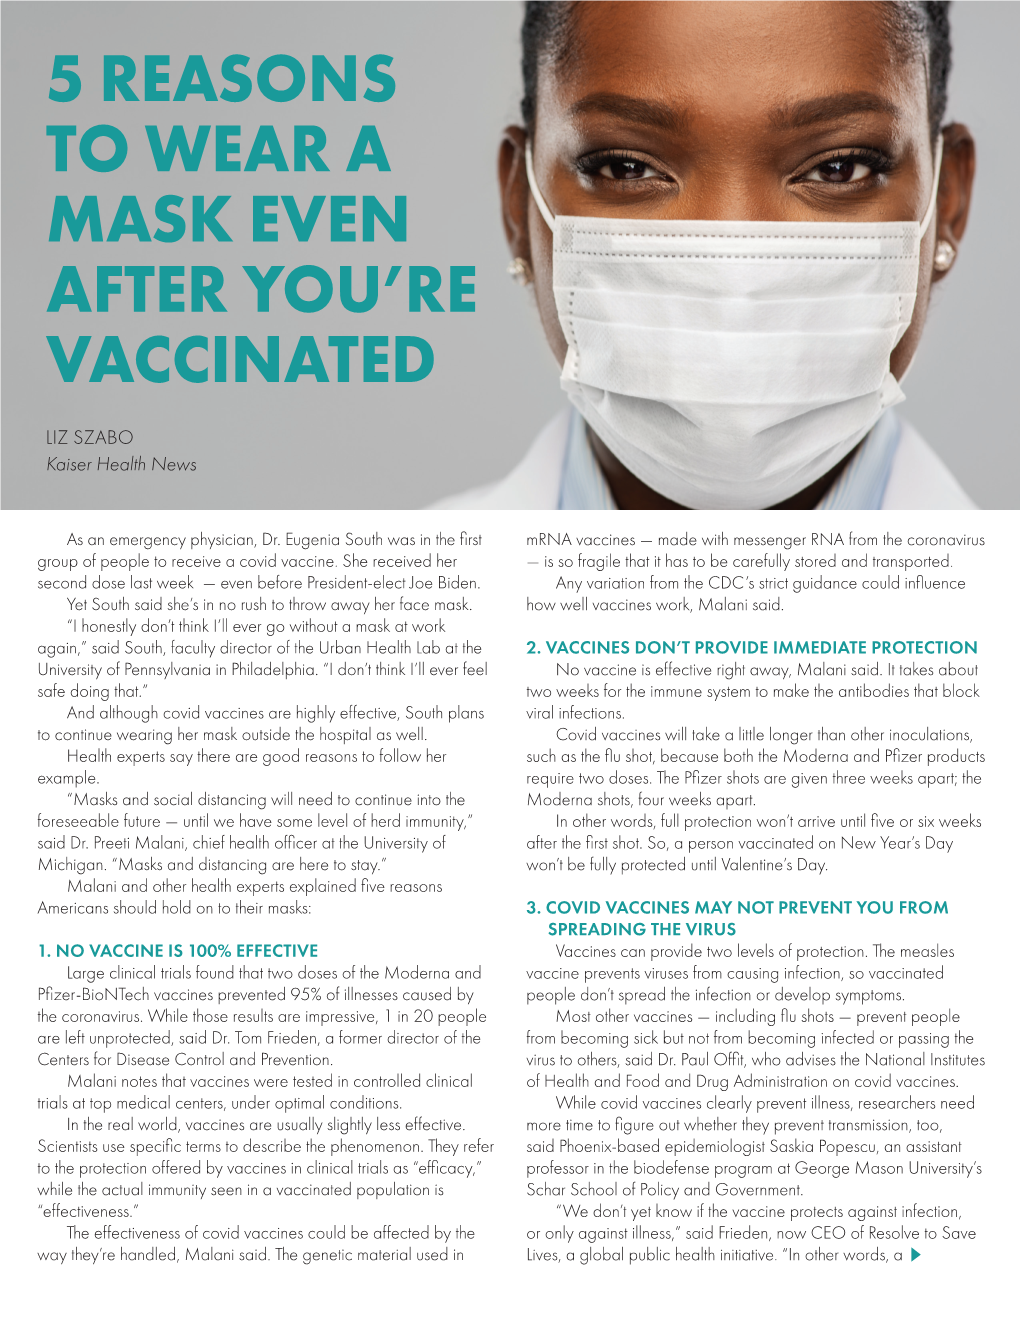 5 Reasons to Wear a Mask Even After You're Vaccinated